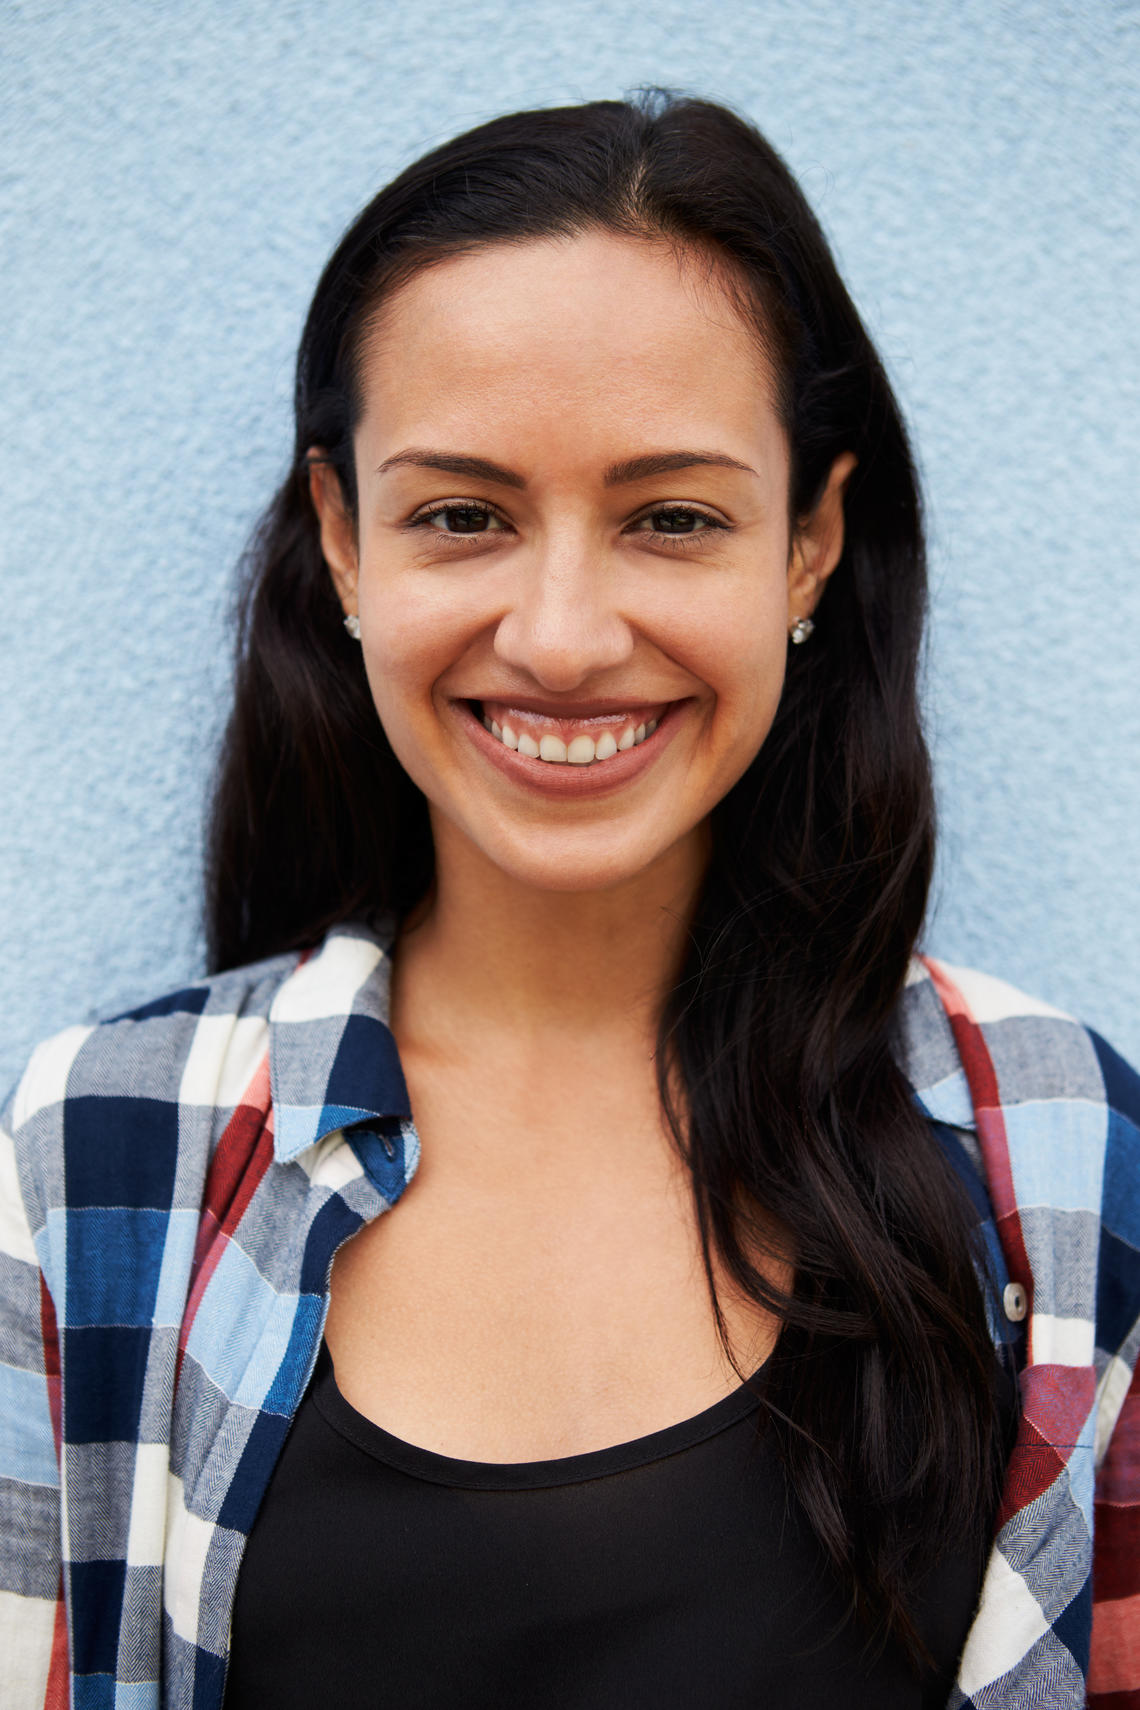 Portrait of a woman with long black hair. She is smiling and wearing a red/blue/white checkered flannel top with a black tank top underneath